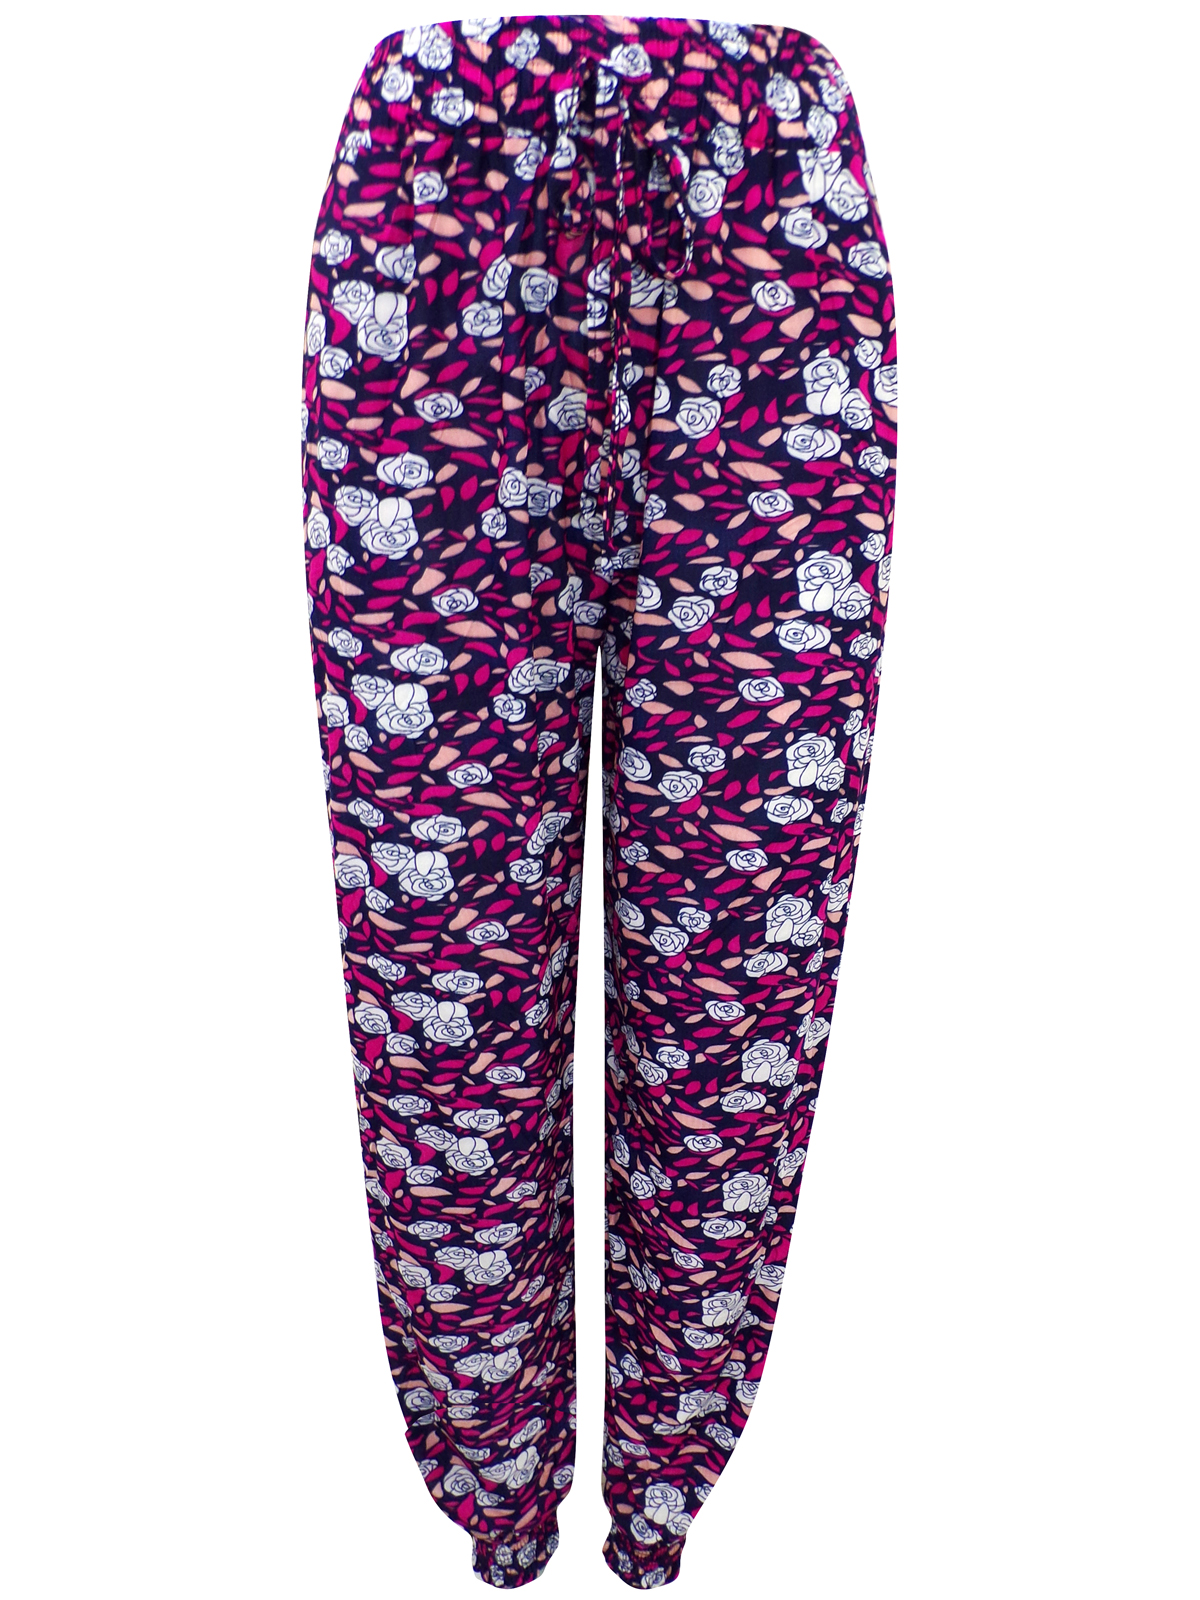 Luxestar - - Luxestar PINK Pull On Printed Harem Trousers - Size 12/14 ...